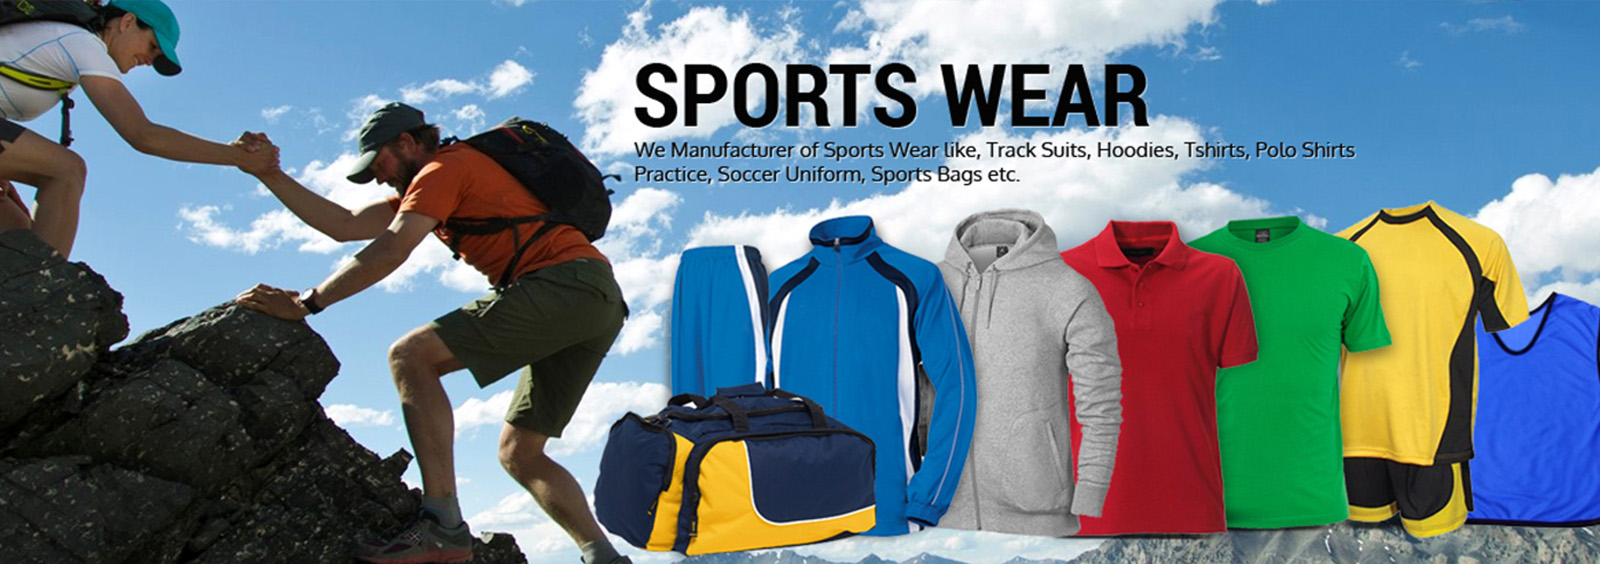 Sports Wear at Best Price from Manufacturers, Suppliers & Dealers